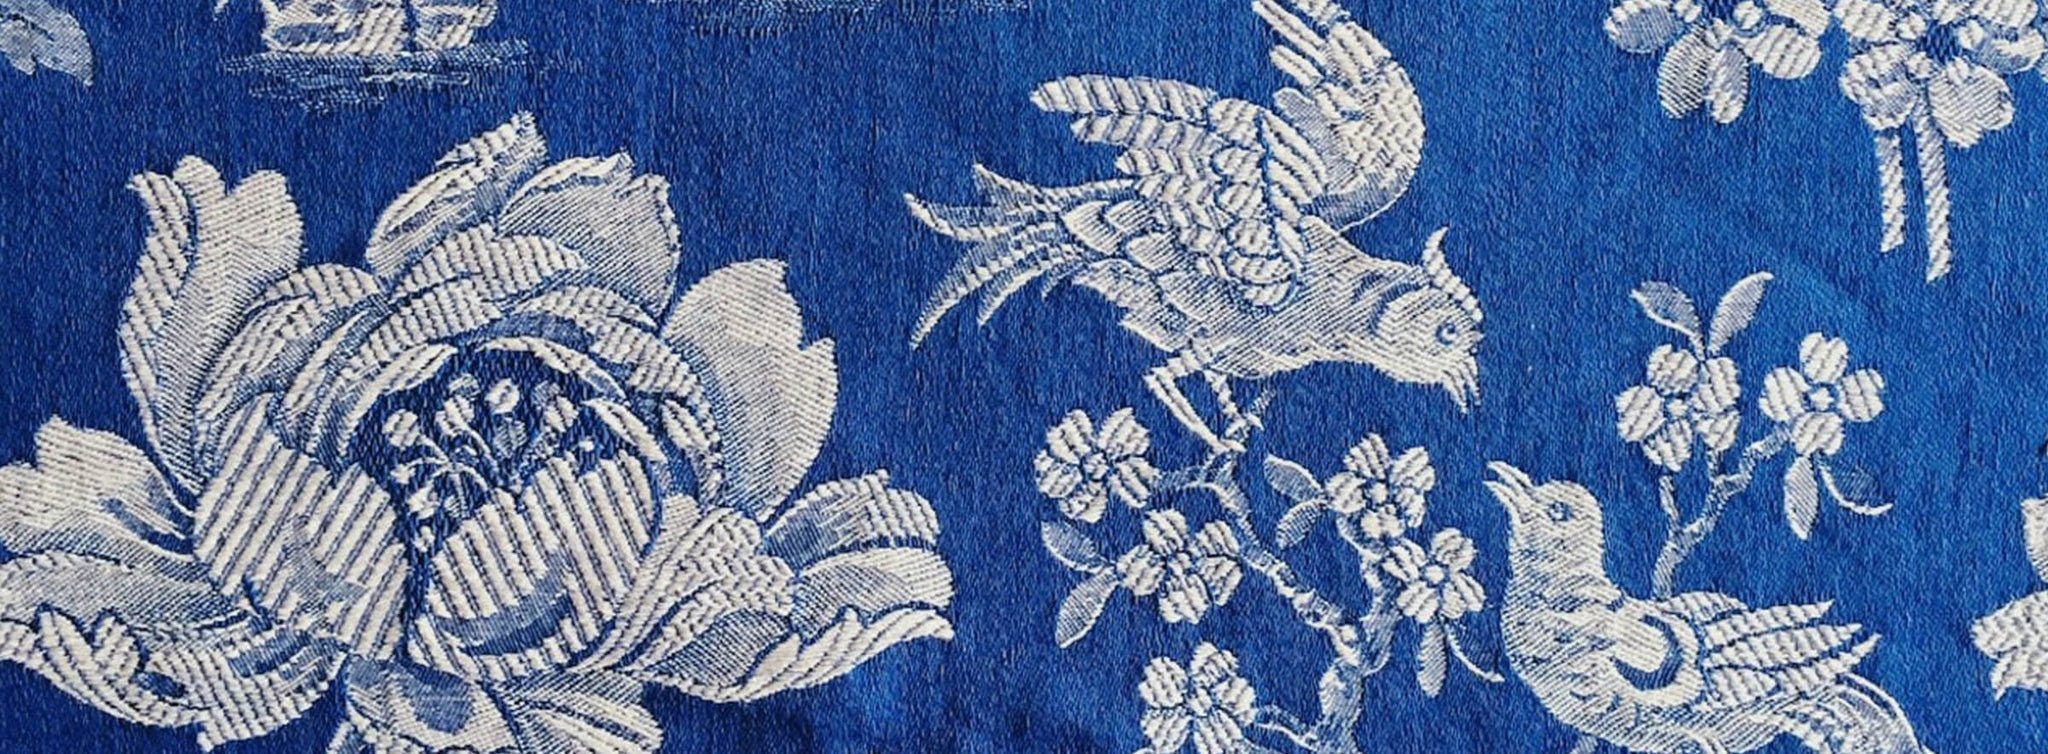 Ticking Depot | Recovered Antique Damask Ticking Fabric | Old Ticking Fabric From Europe Blue Chinoiserie